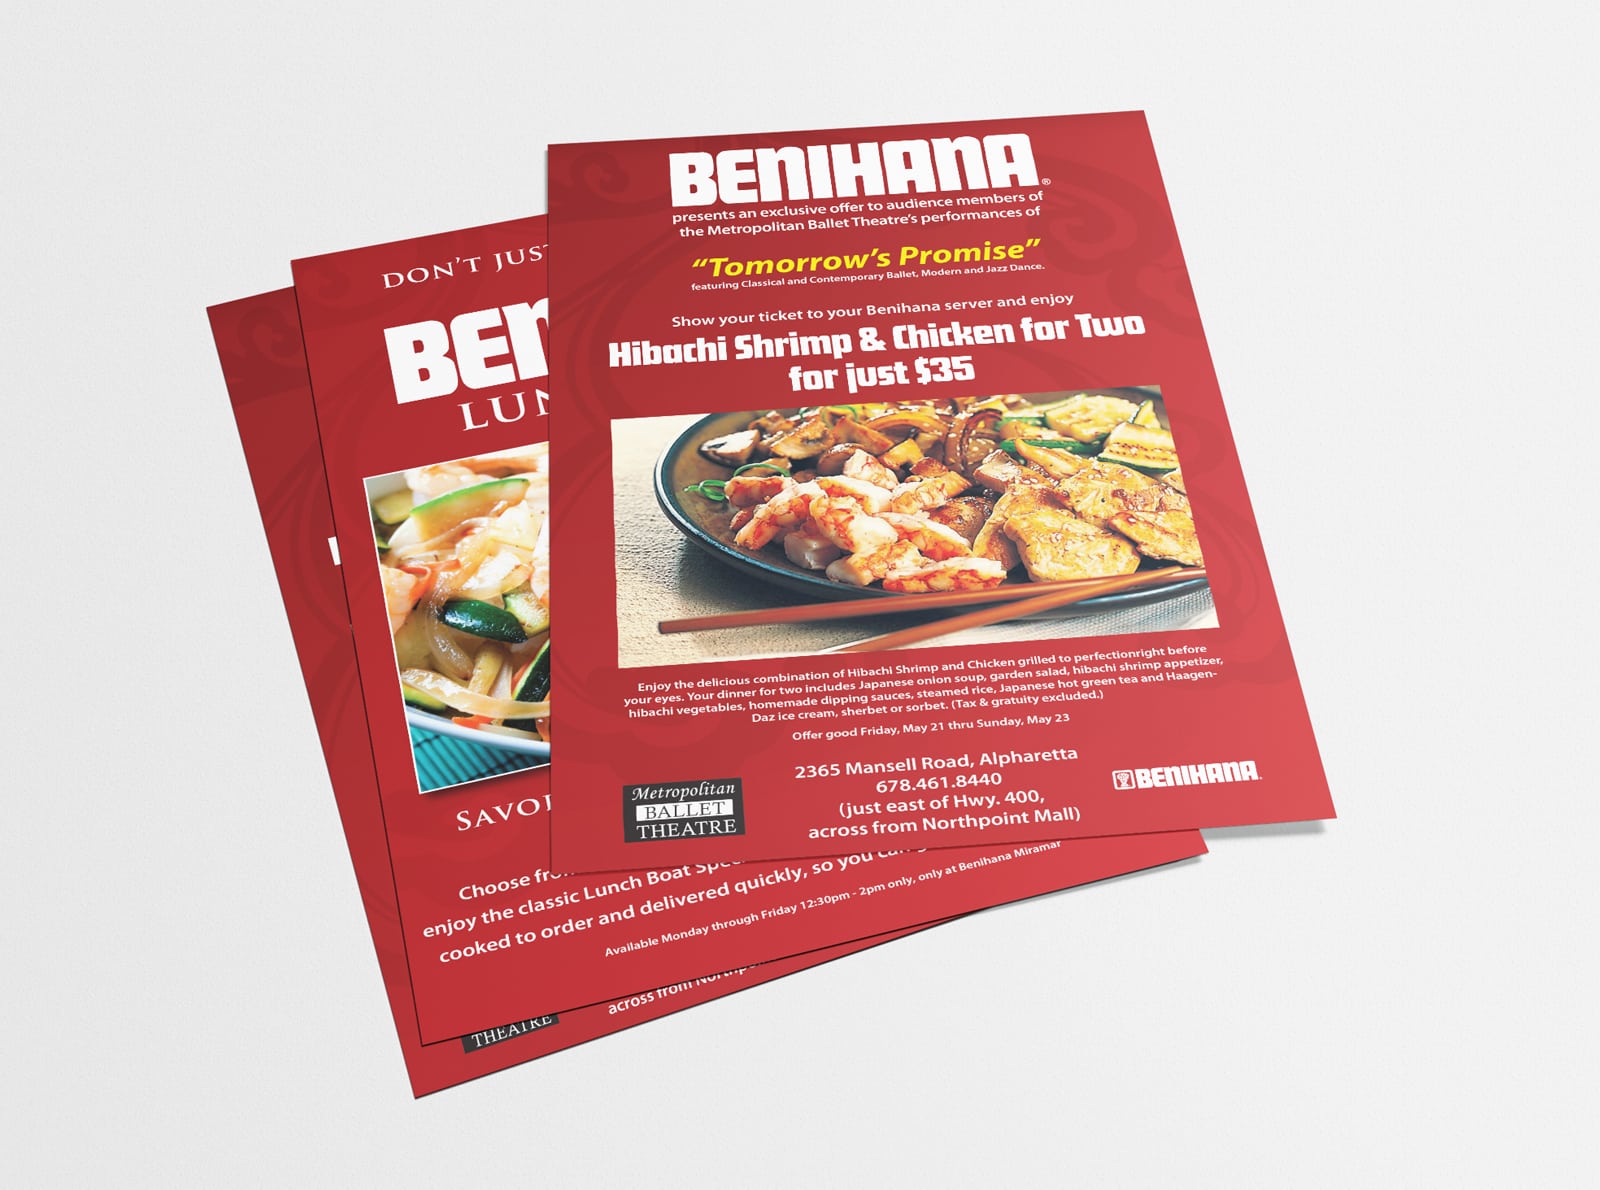 Benihana food brand design red poster featuring the restaurant's exclusive entree against grey backdrop.